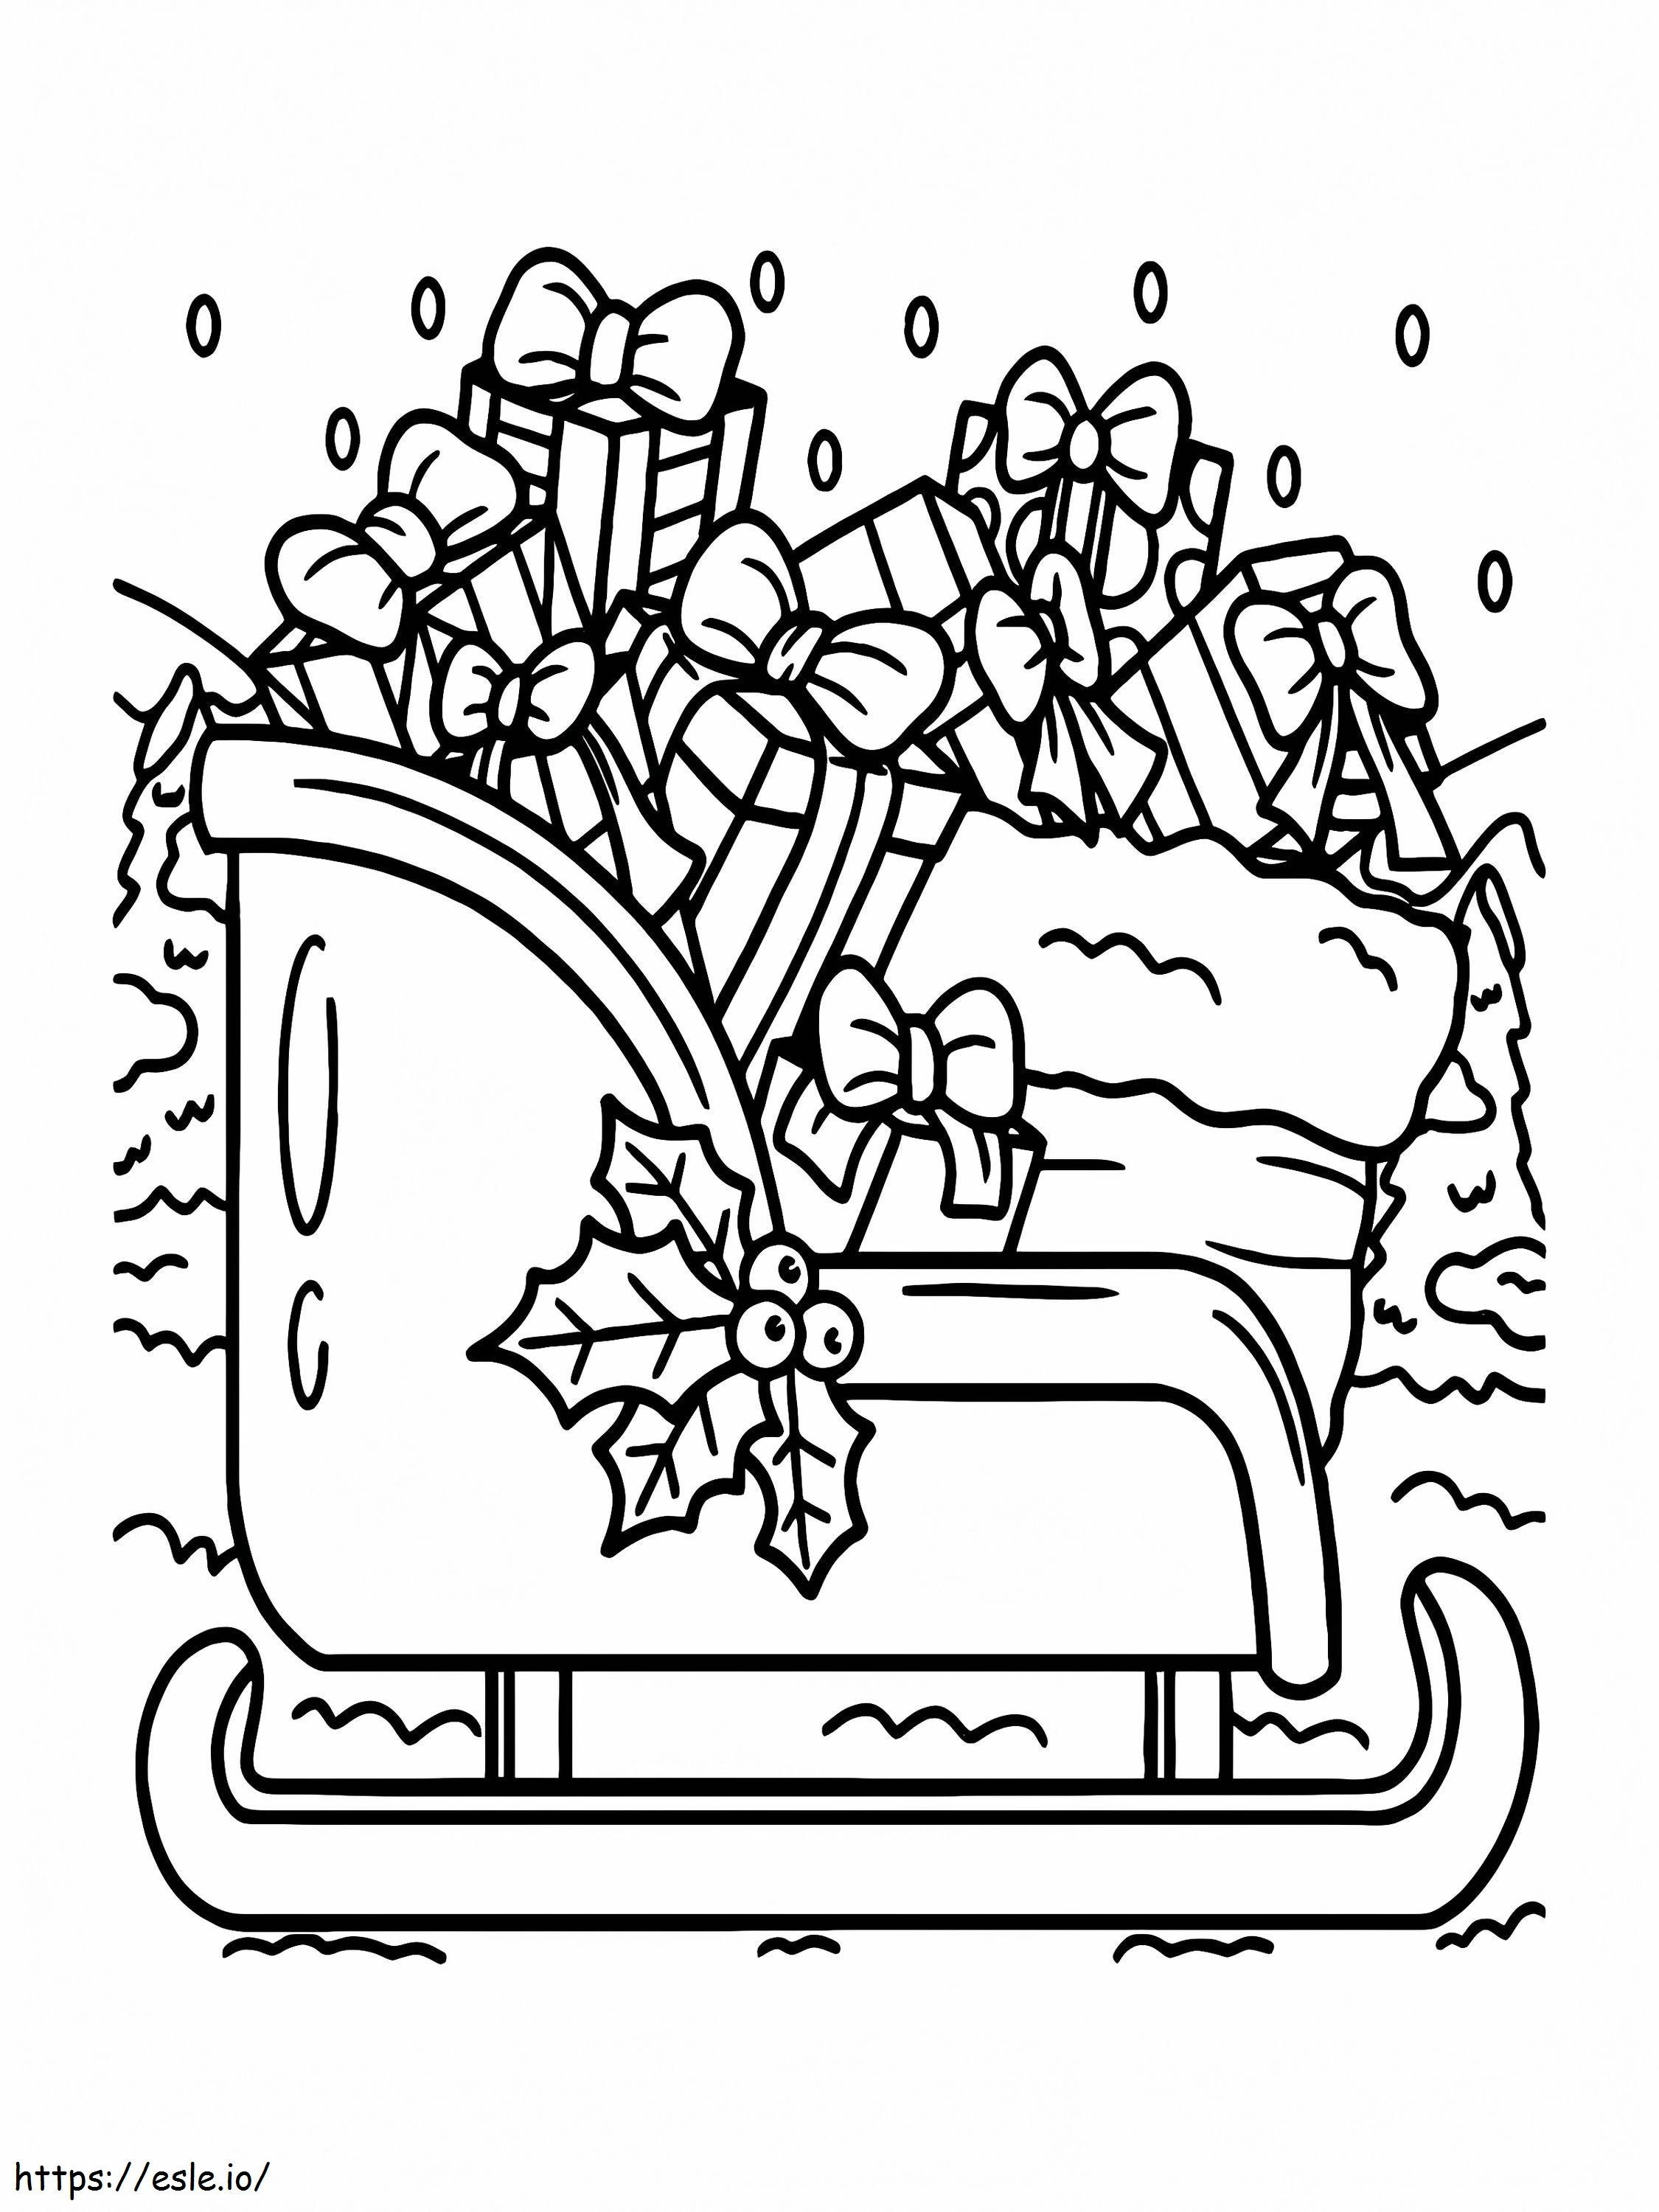 Gifts On Santa S Sleigh coloring page